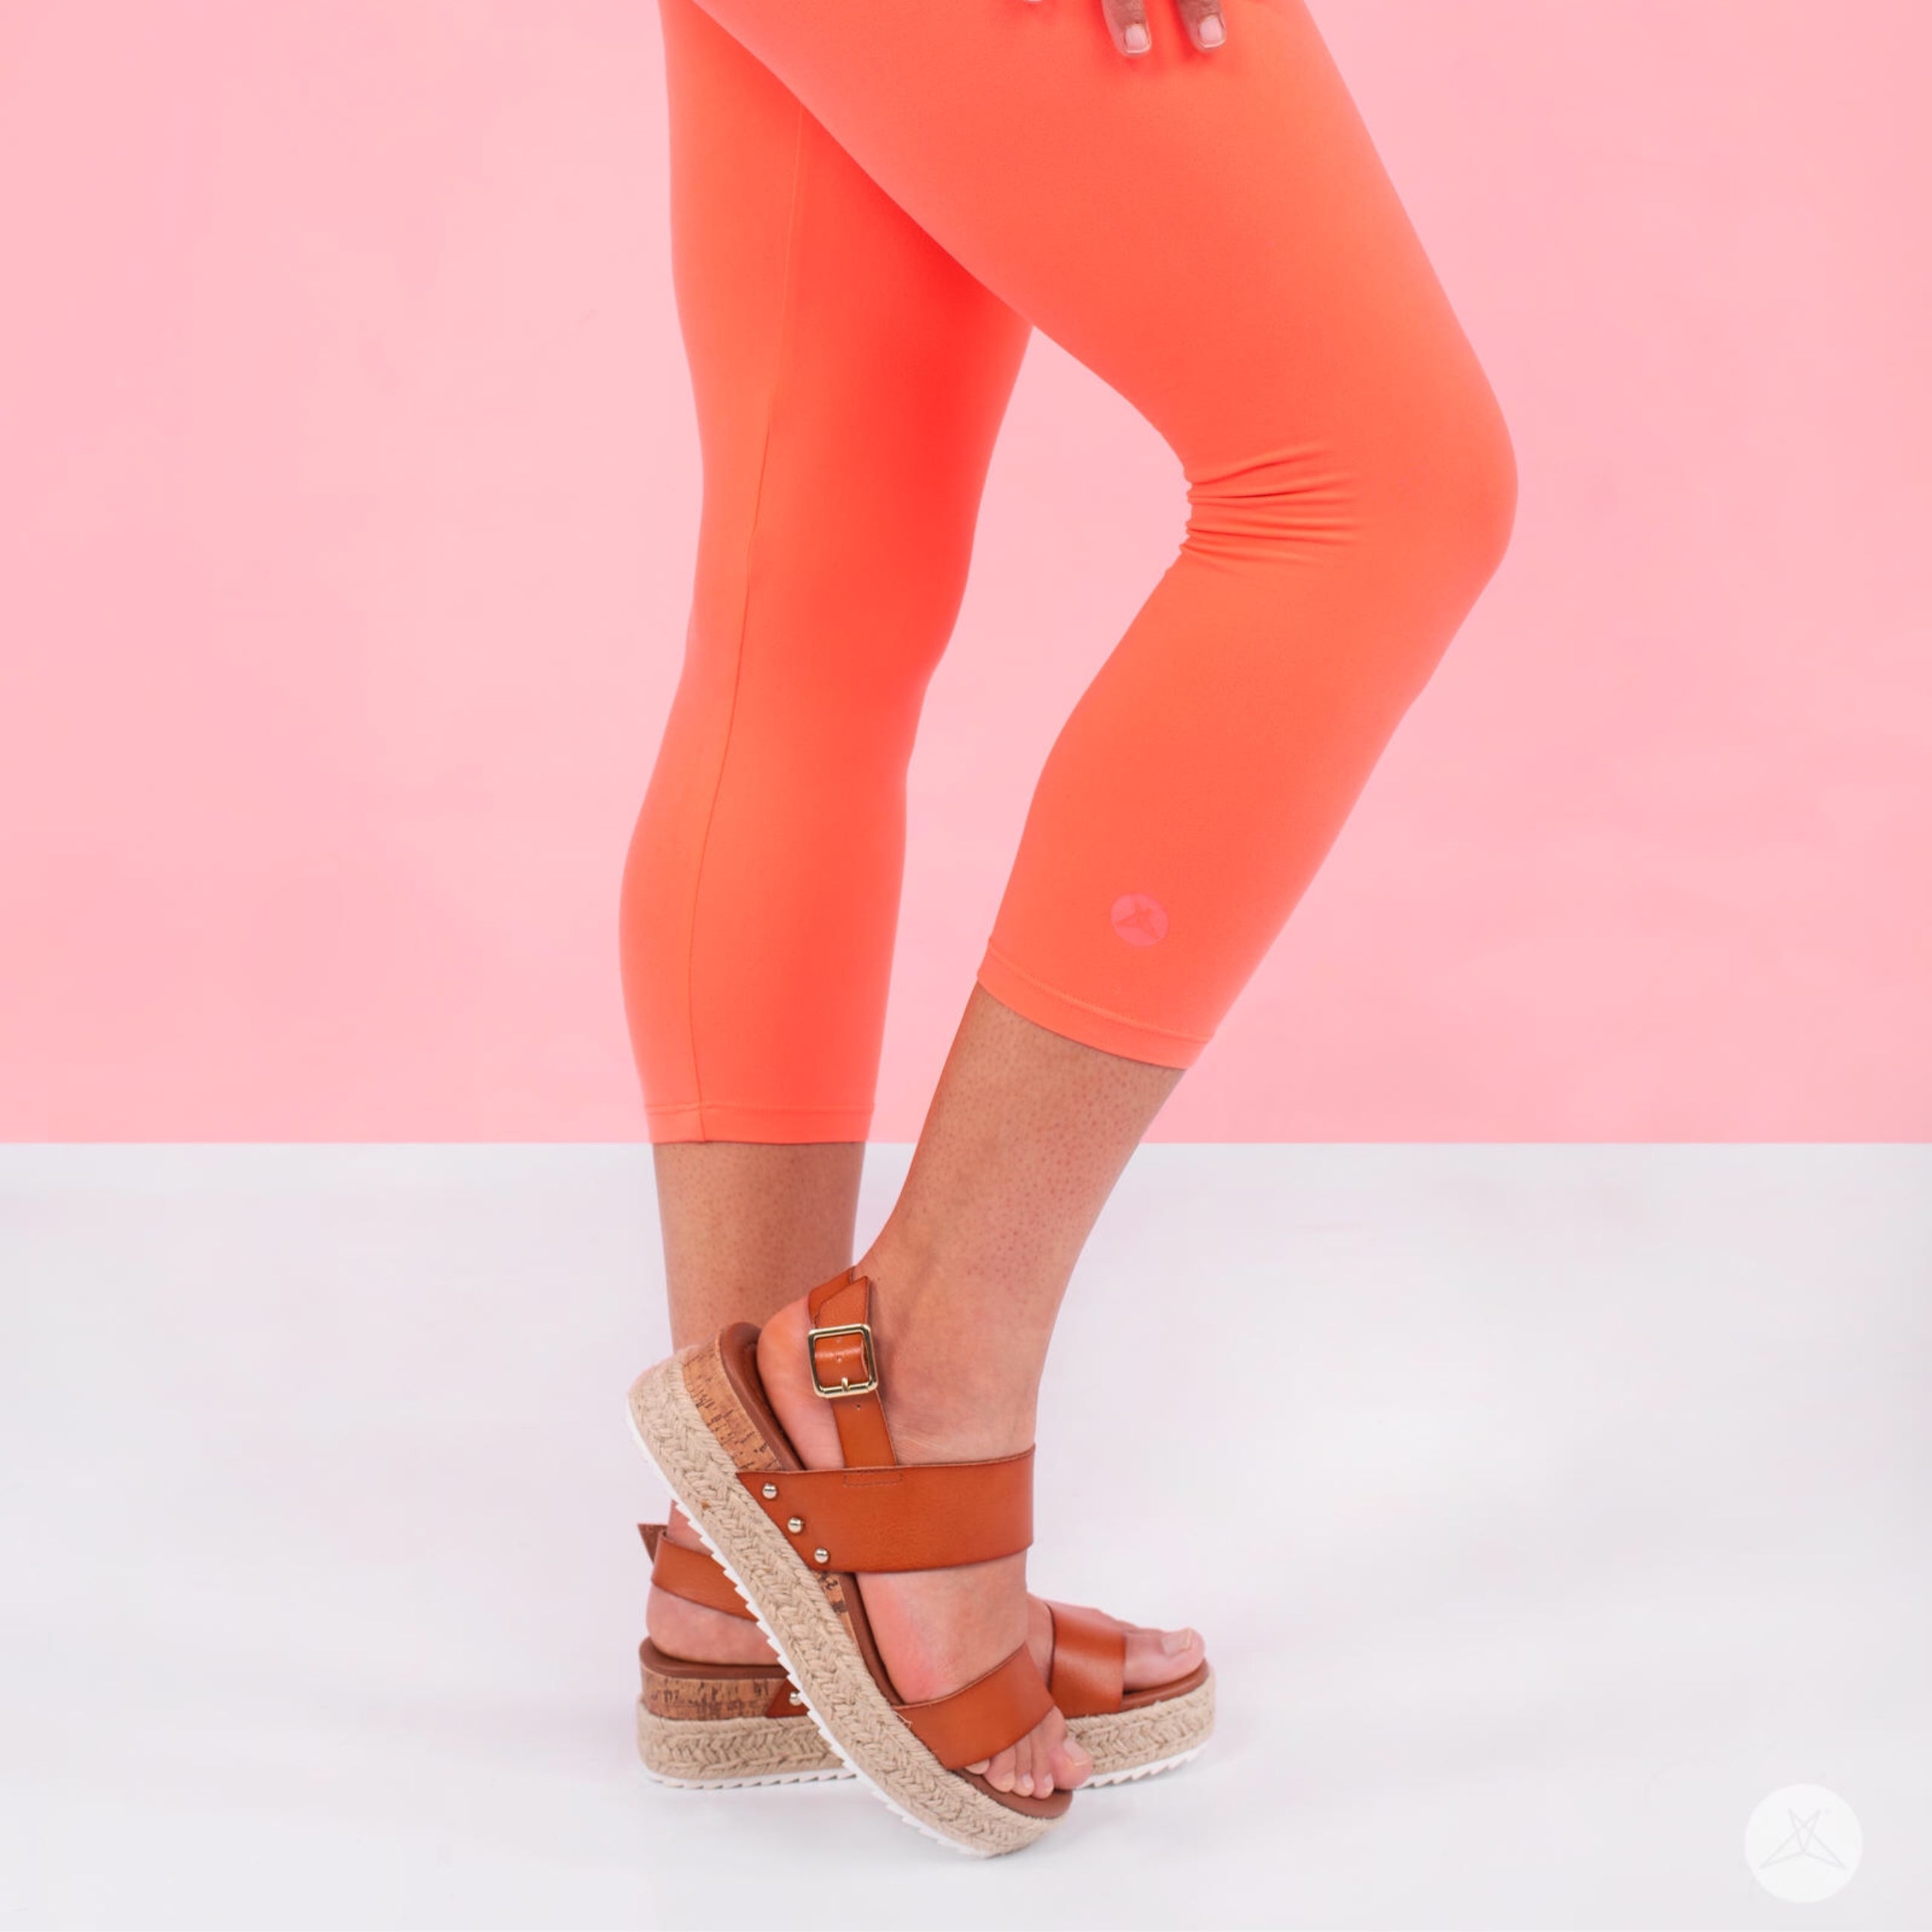 Stay Peachy Crops - One Size  SweetLegs New Westminster with Katerina